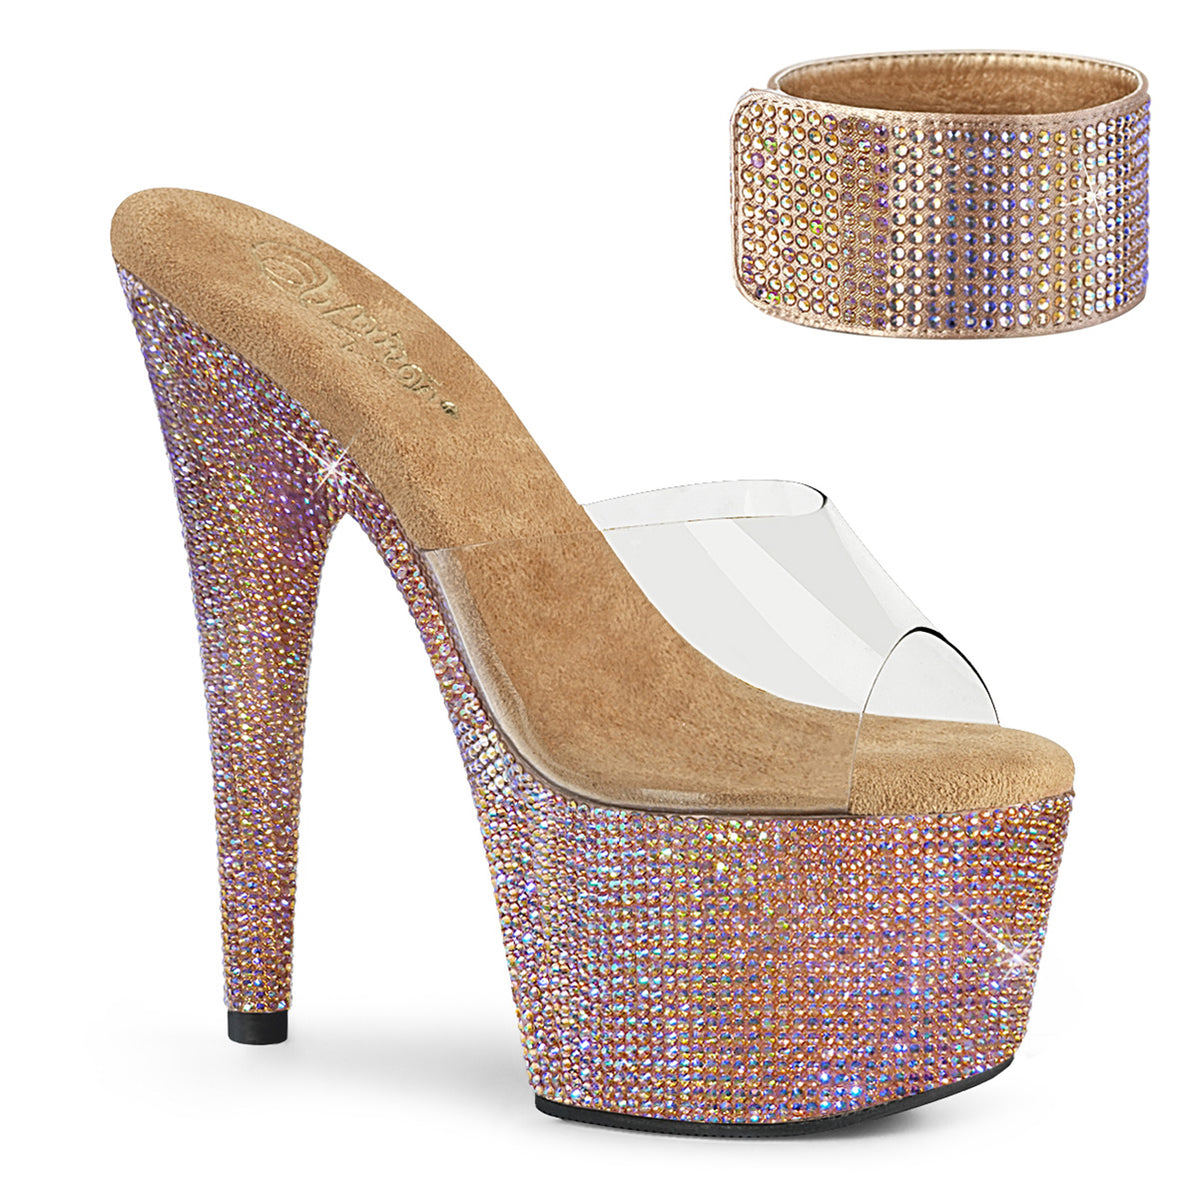 Pleaser Shoes | Pleaser Heels | Sinful Shoes — Page 4 — SinfulShoes.com